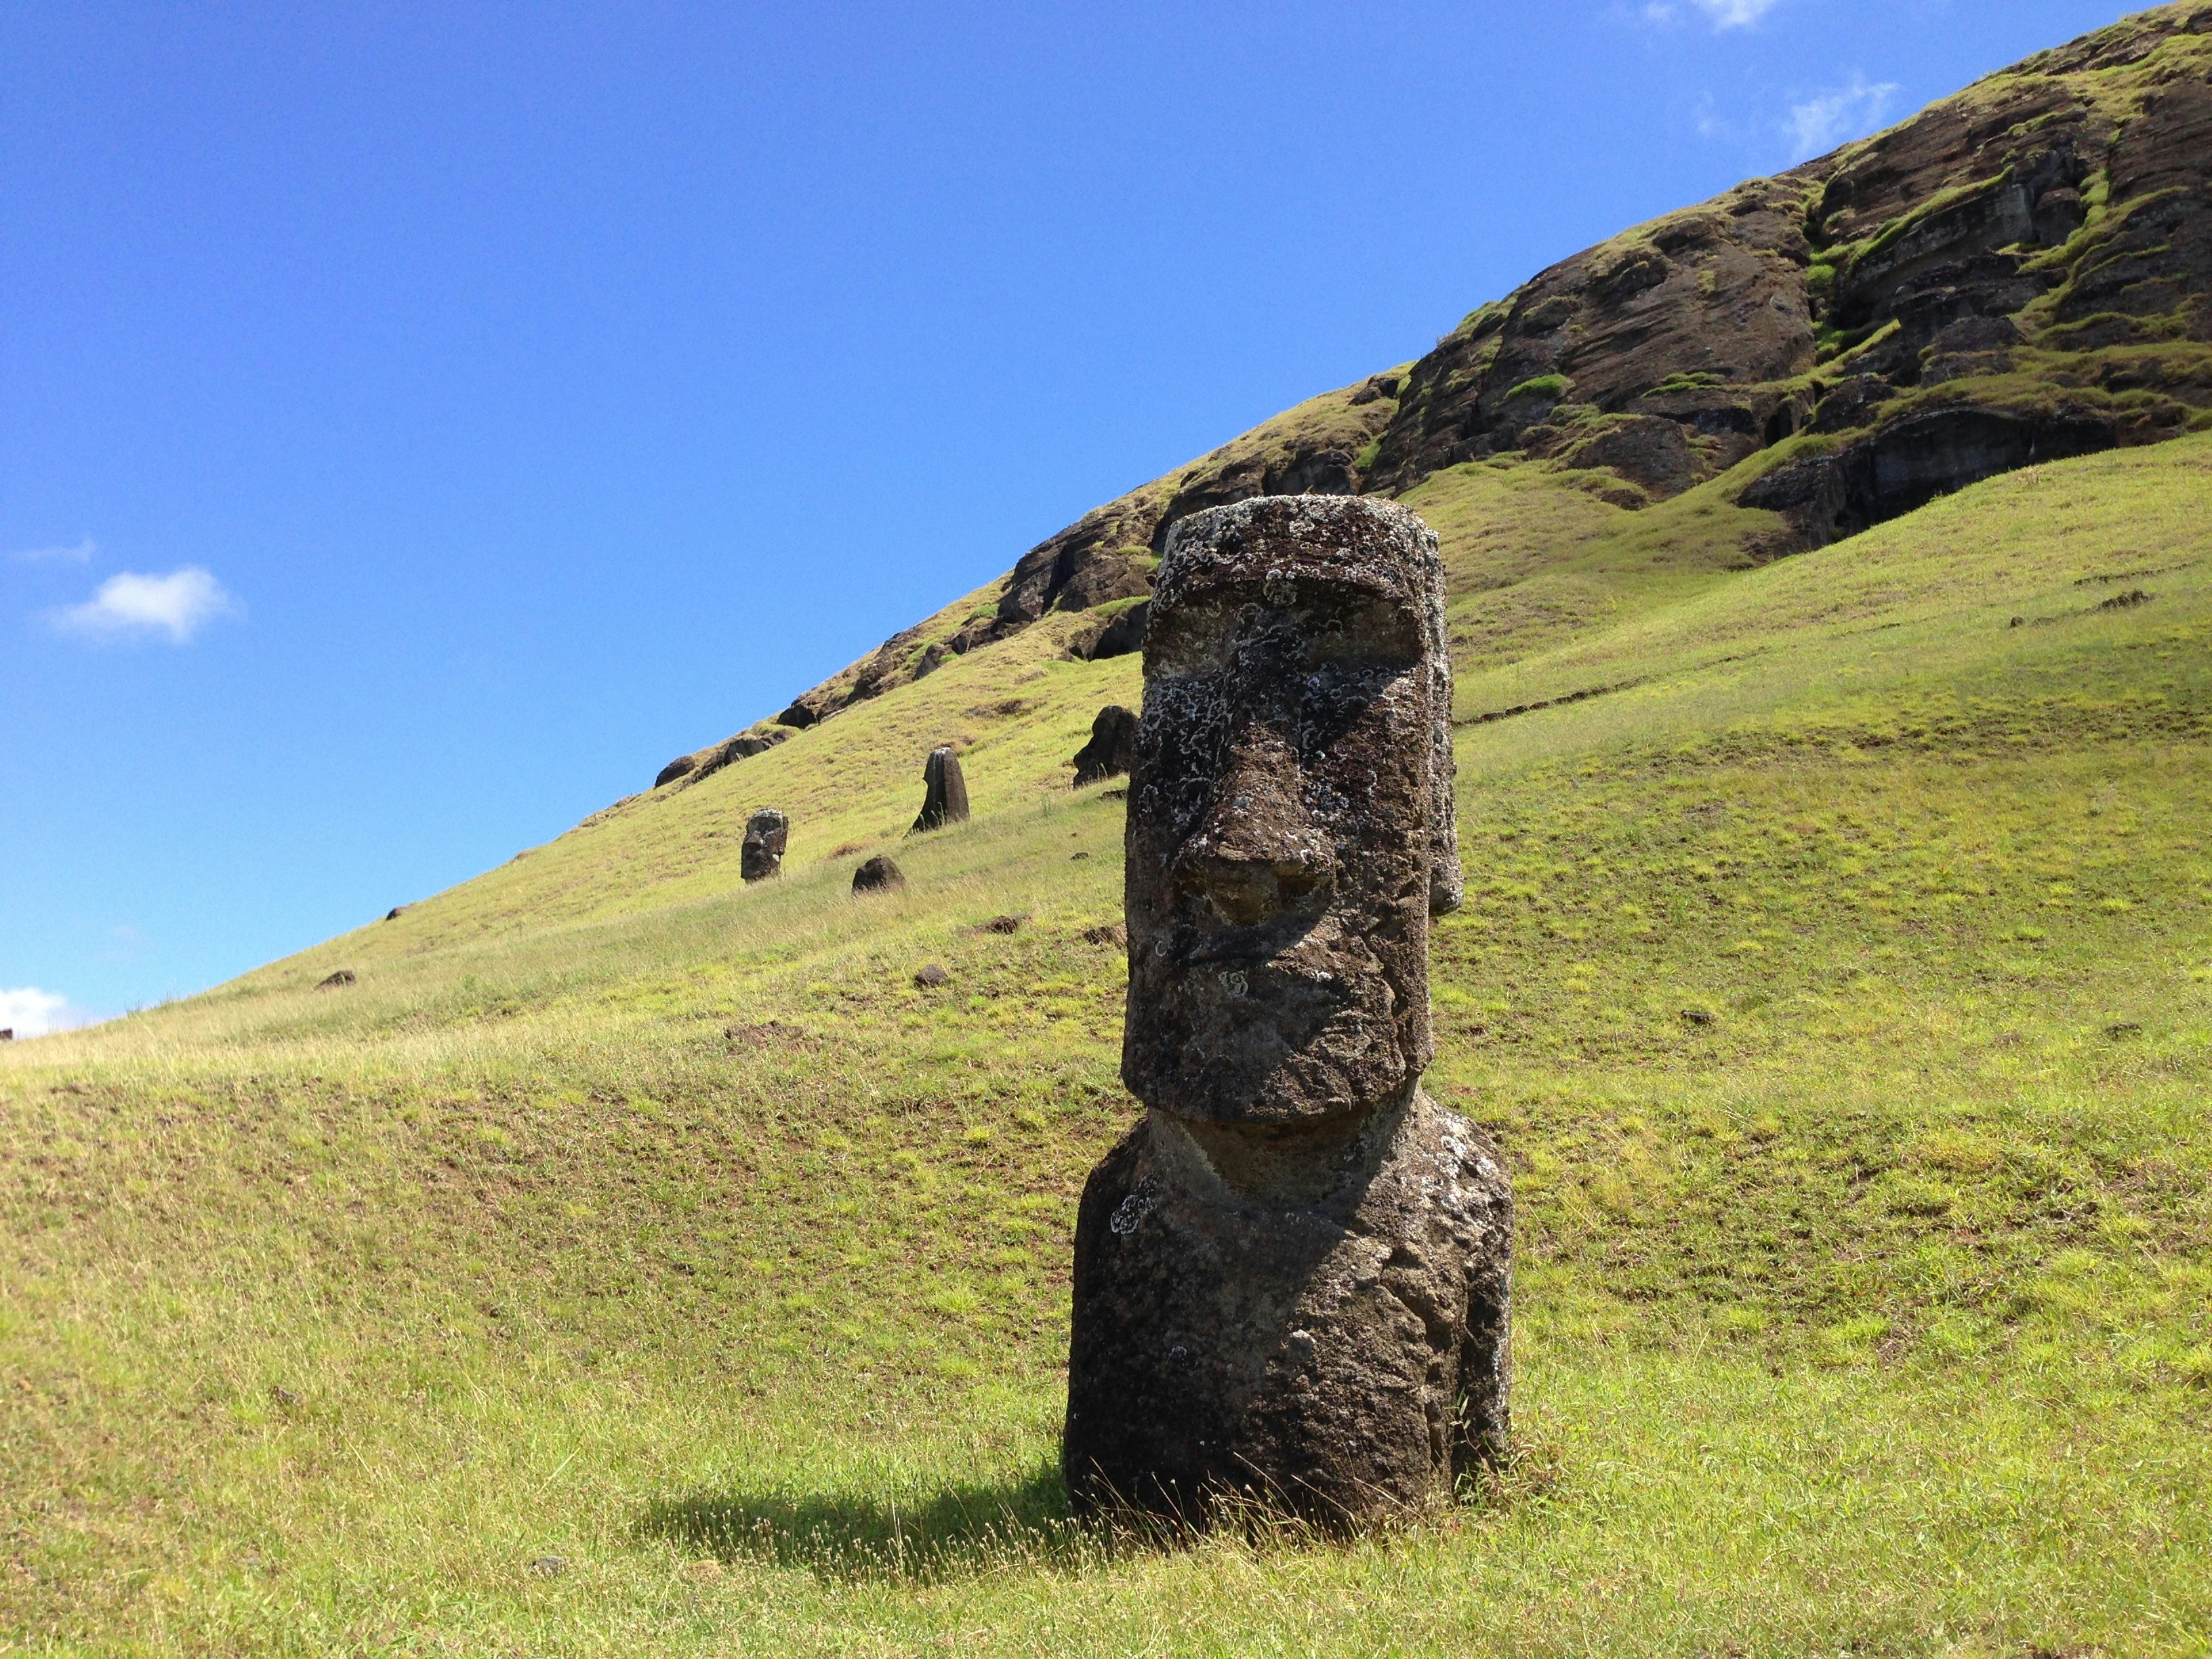 Moai are monolithic human figures carved by the Rapa Nui people on Easter Island